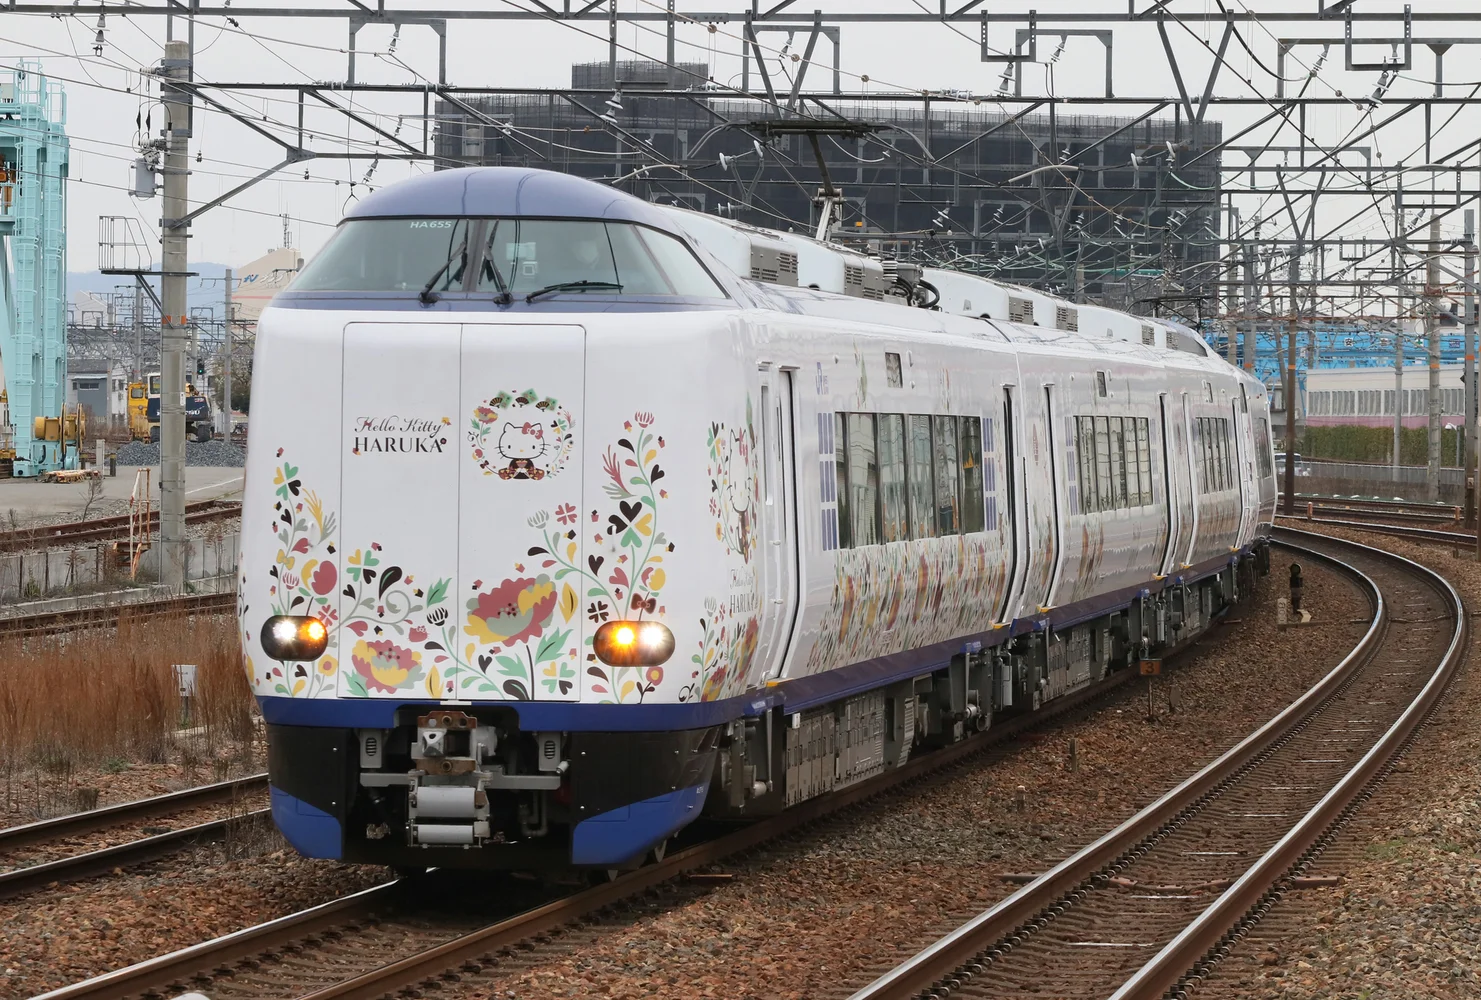 Kansai Airport–Kyoto Haruka Limited Express One-Way Tickets [For Tourists]